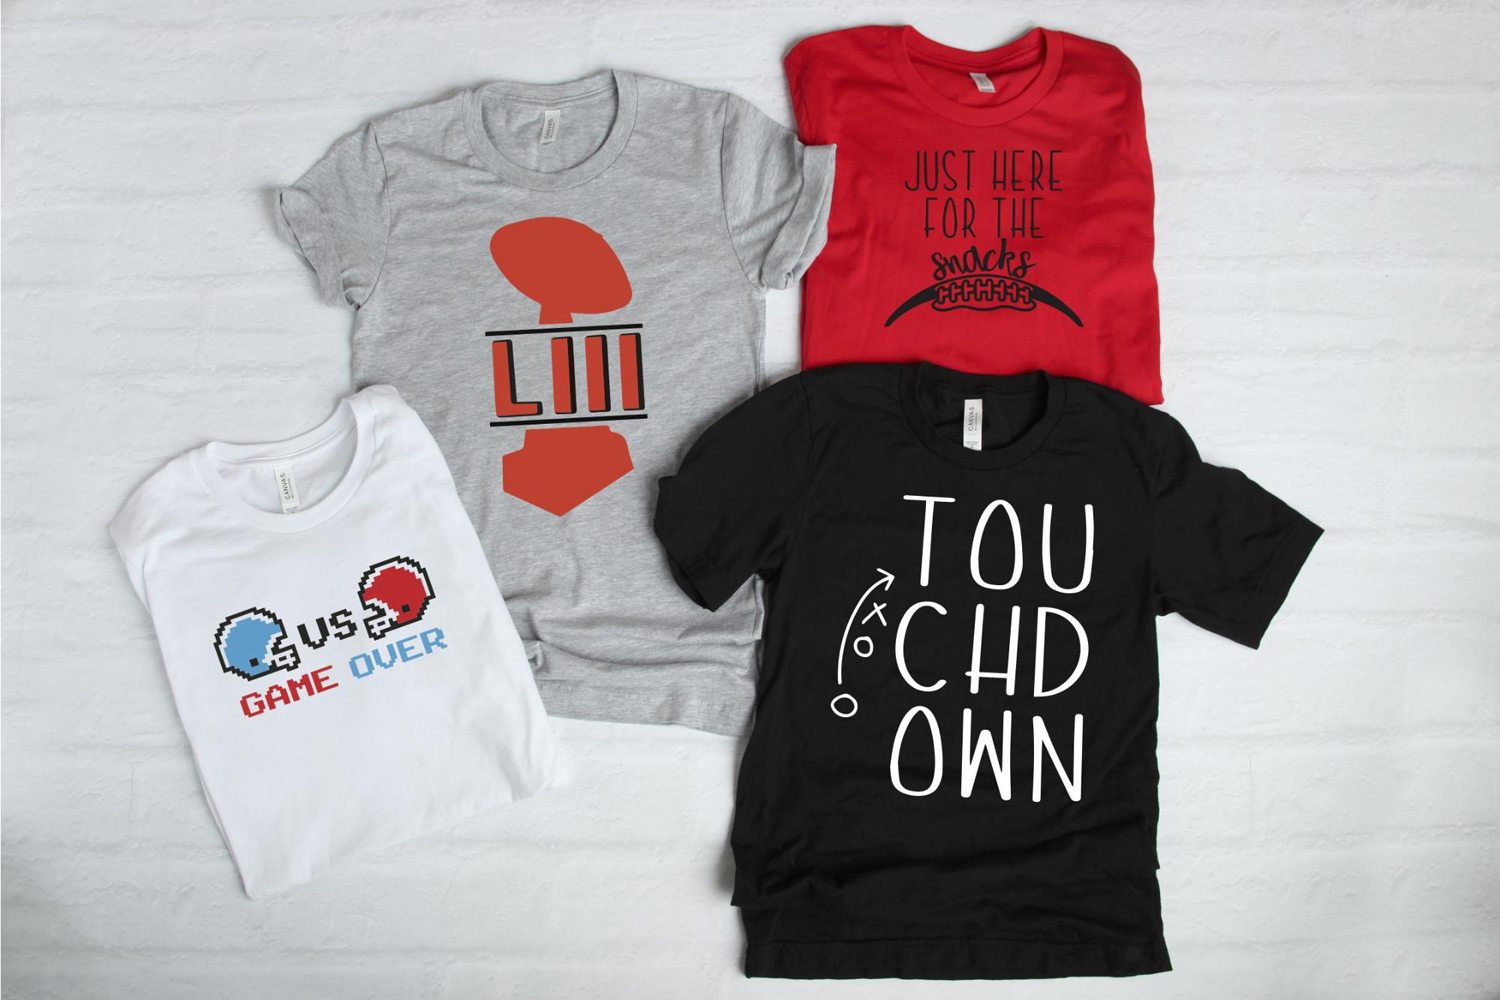 Score a Touchdown With These DIY Football Shirts | Cricut